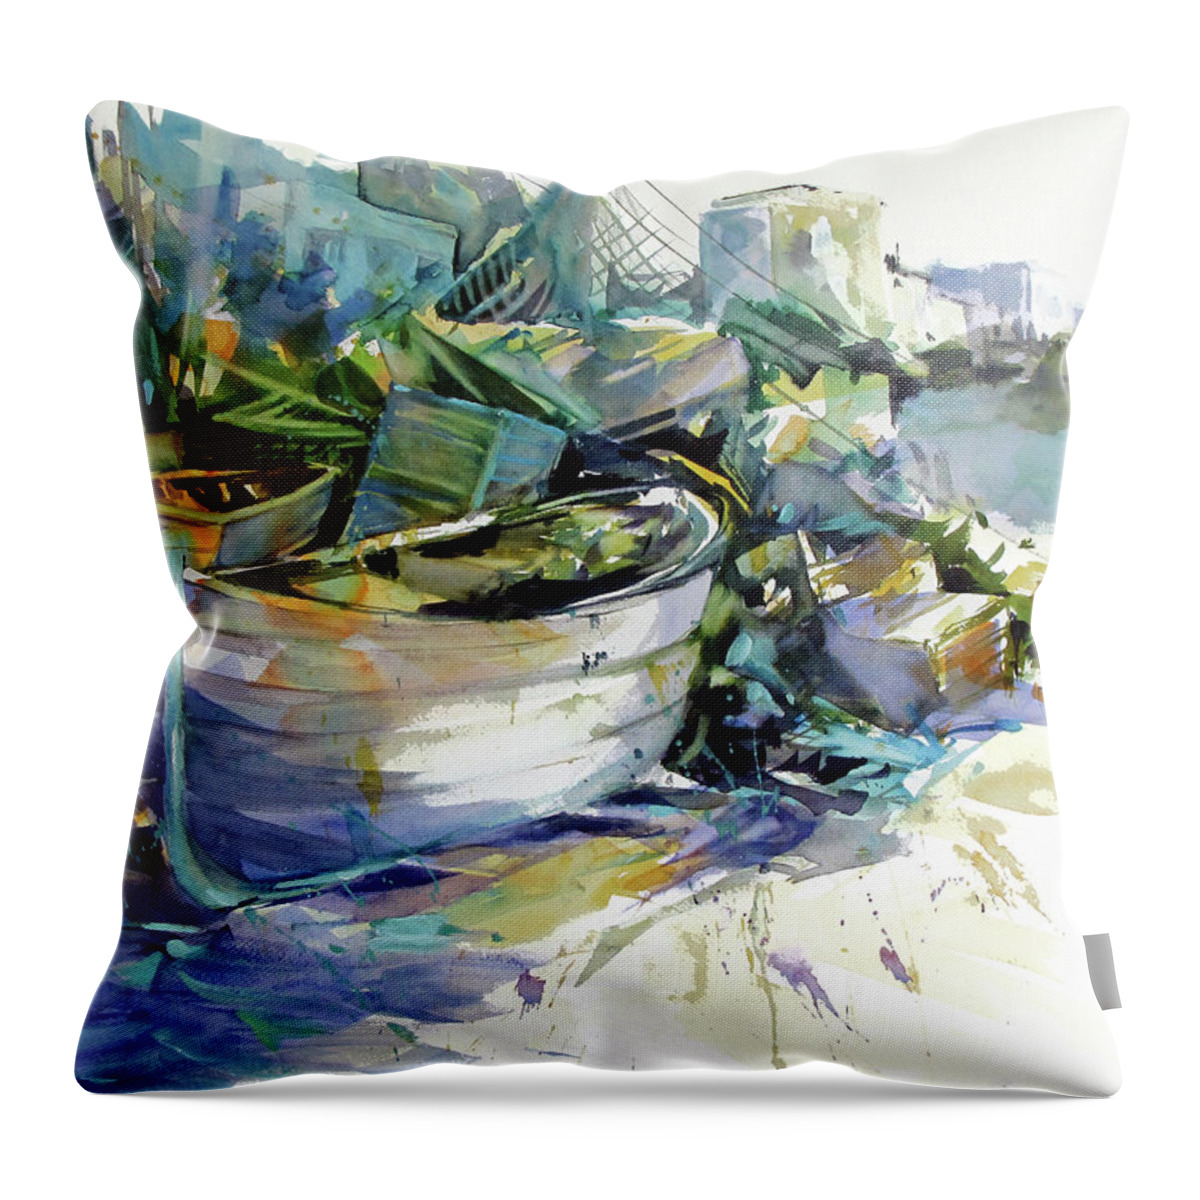 Boats Throw Pillow featuring the painting Rest In Peace by Rae Andrews